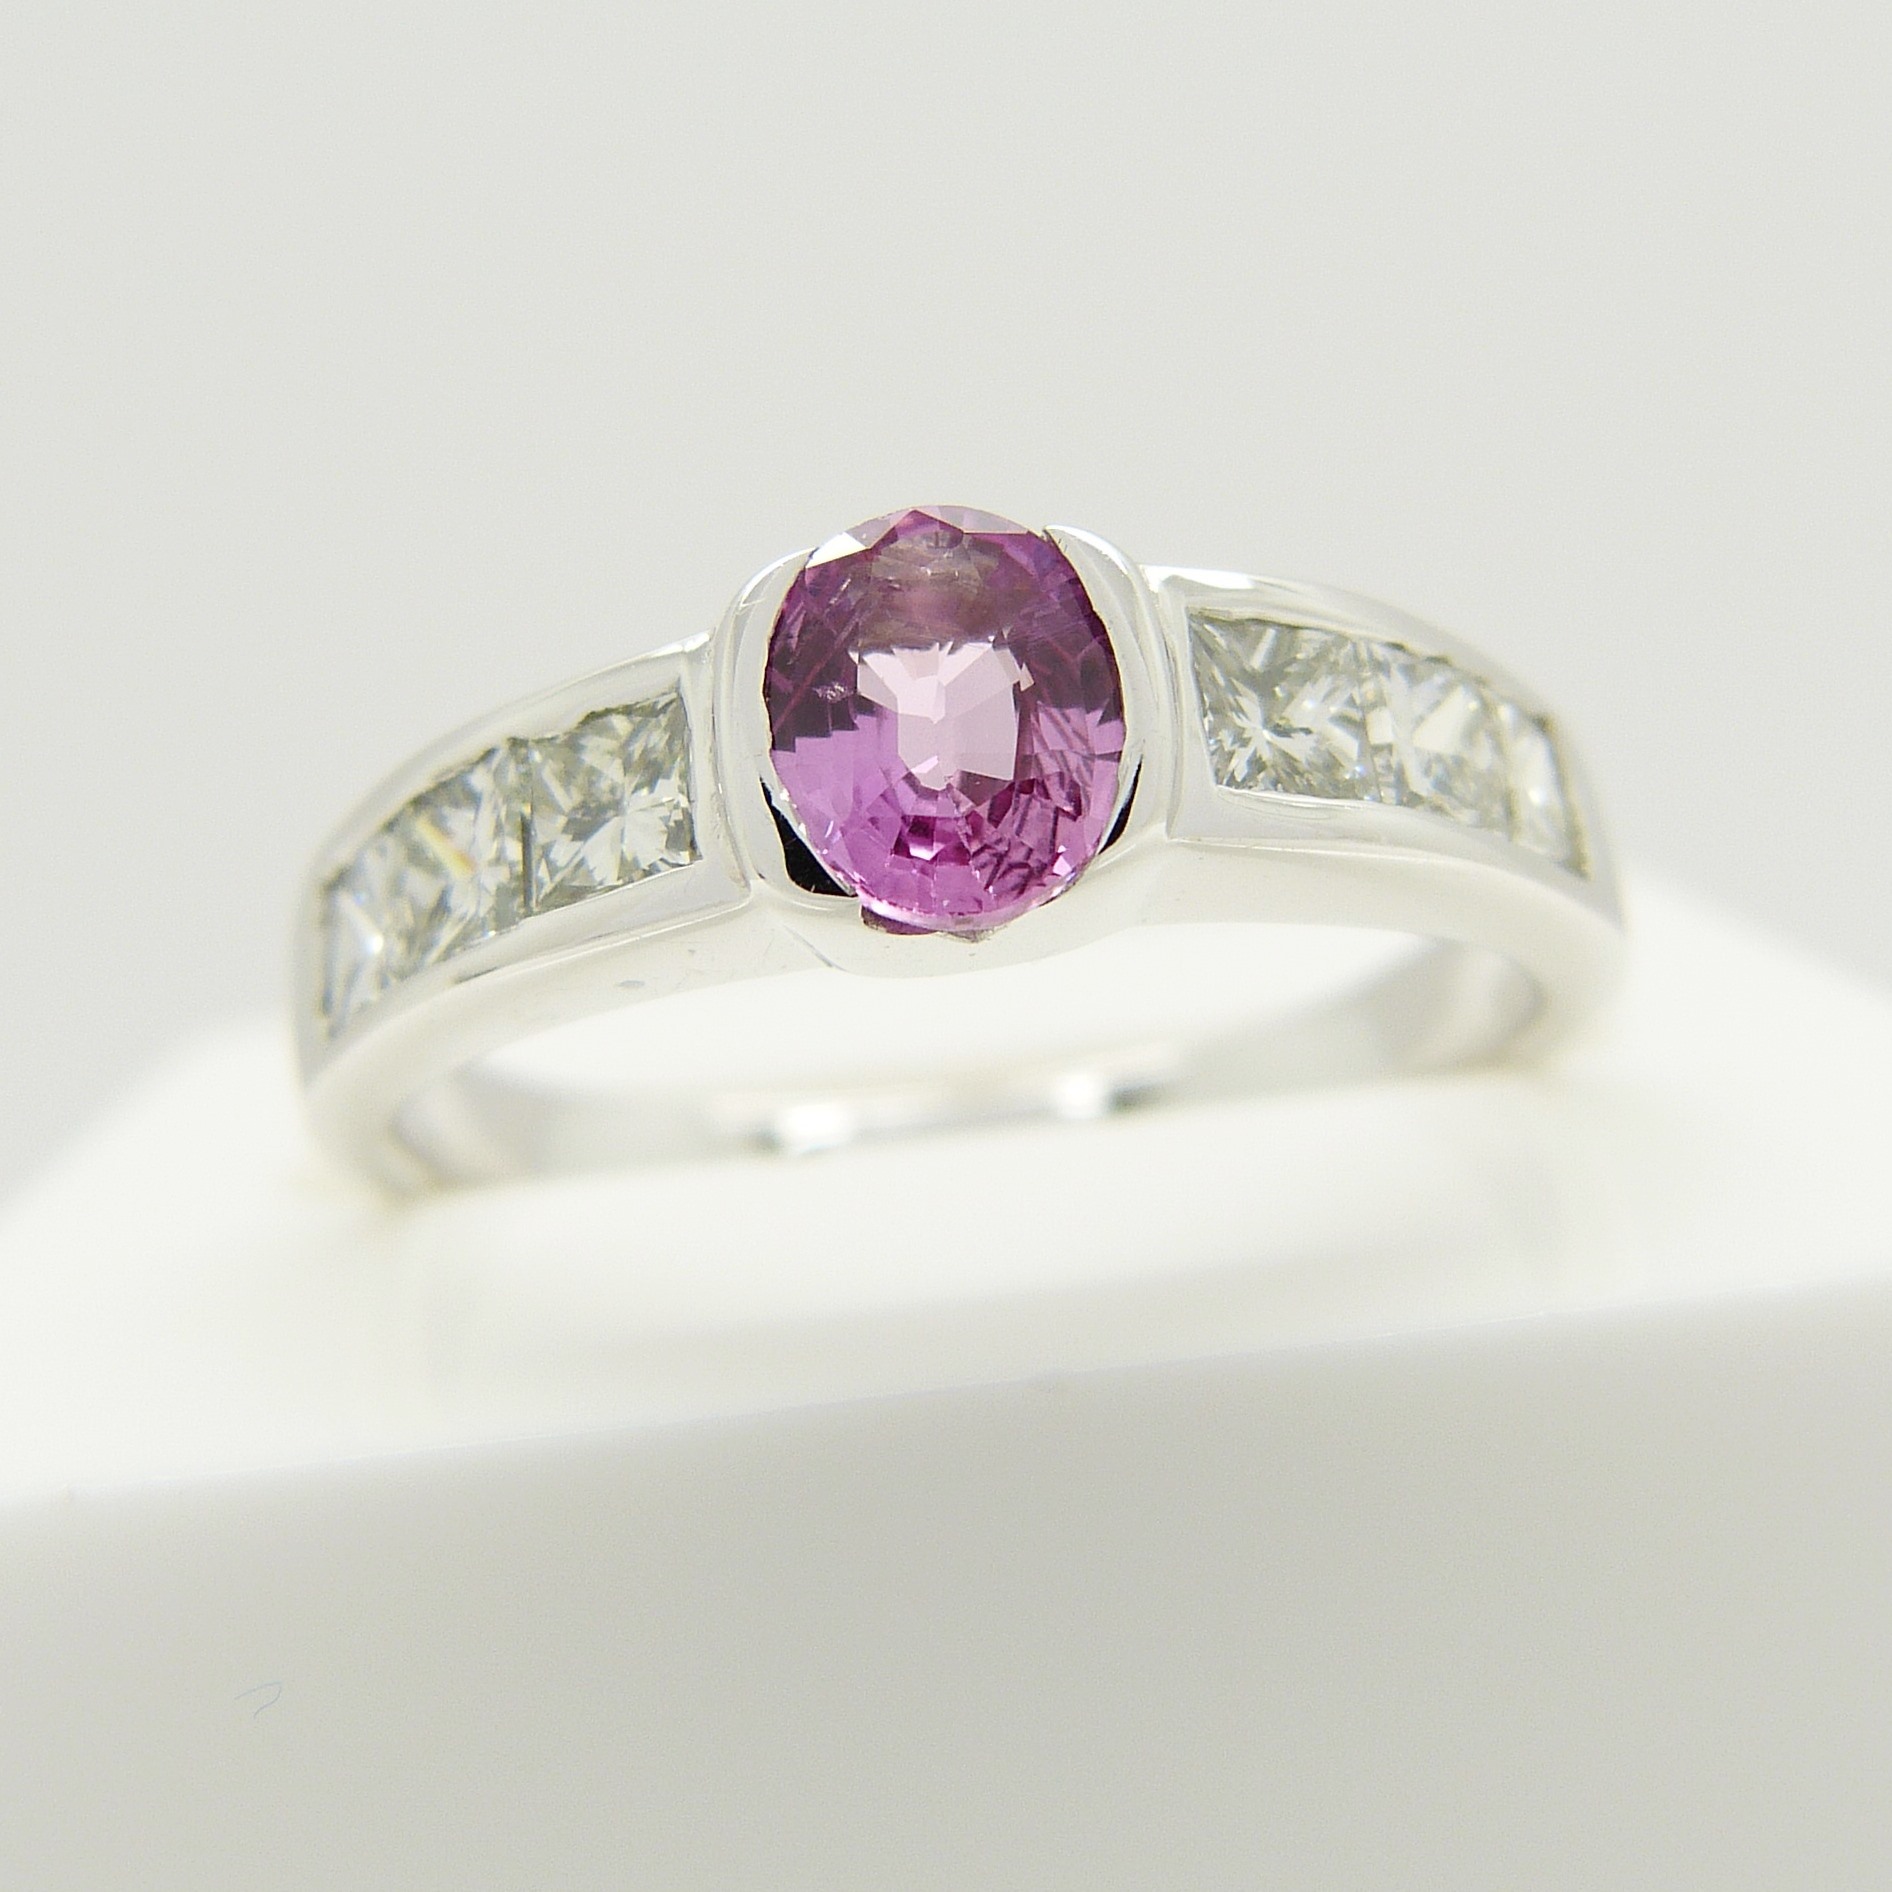 A pink Sapphire gemstone and princess-cut Diamond ring in 18ct white Gold - Image 5 of 7